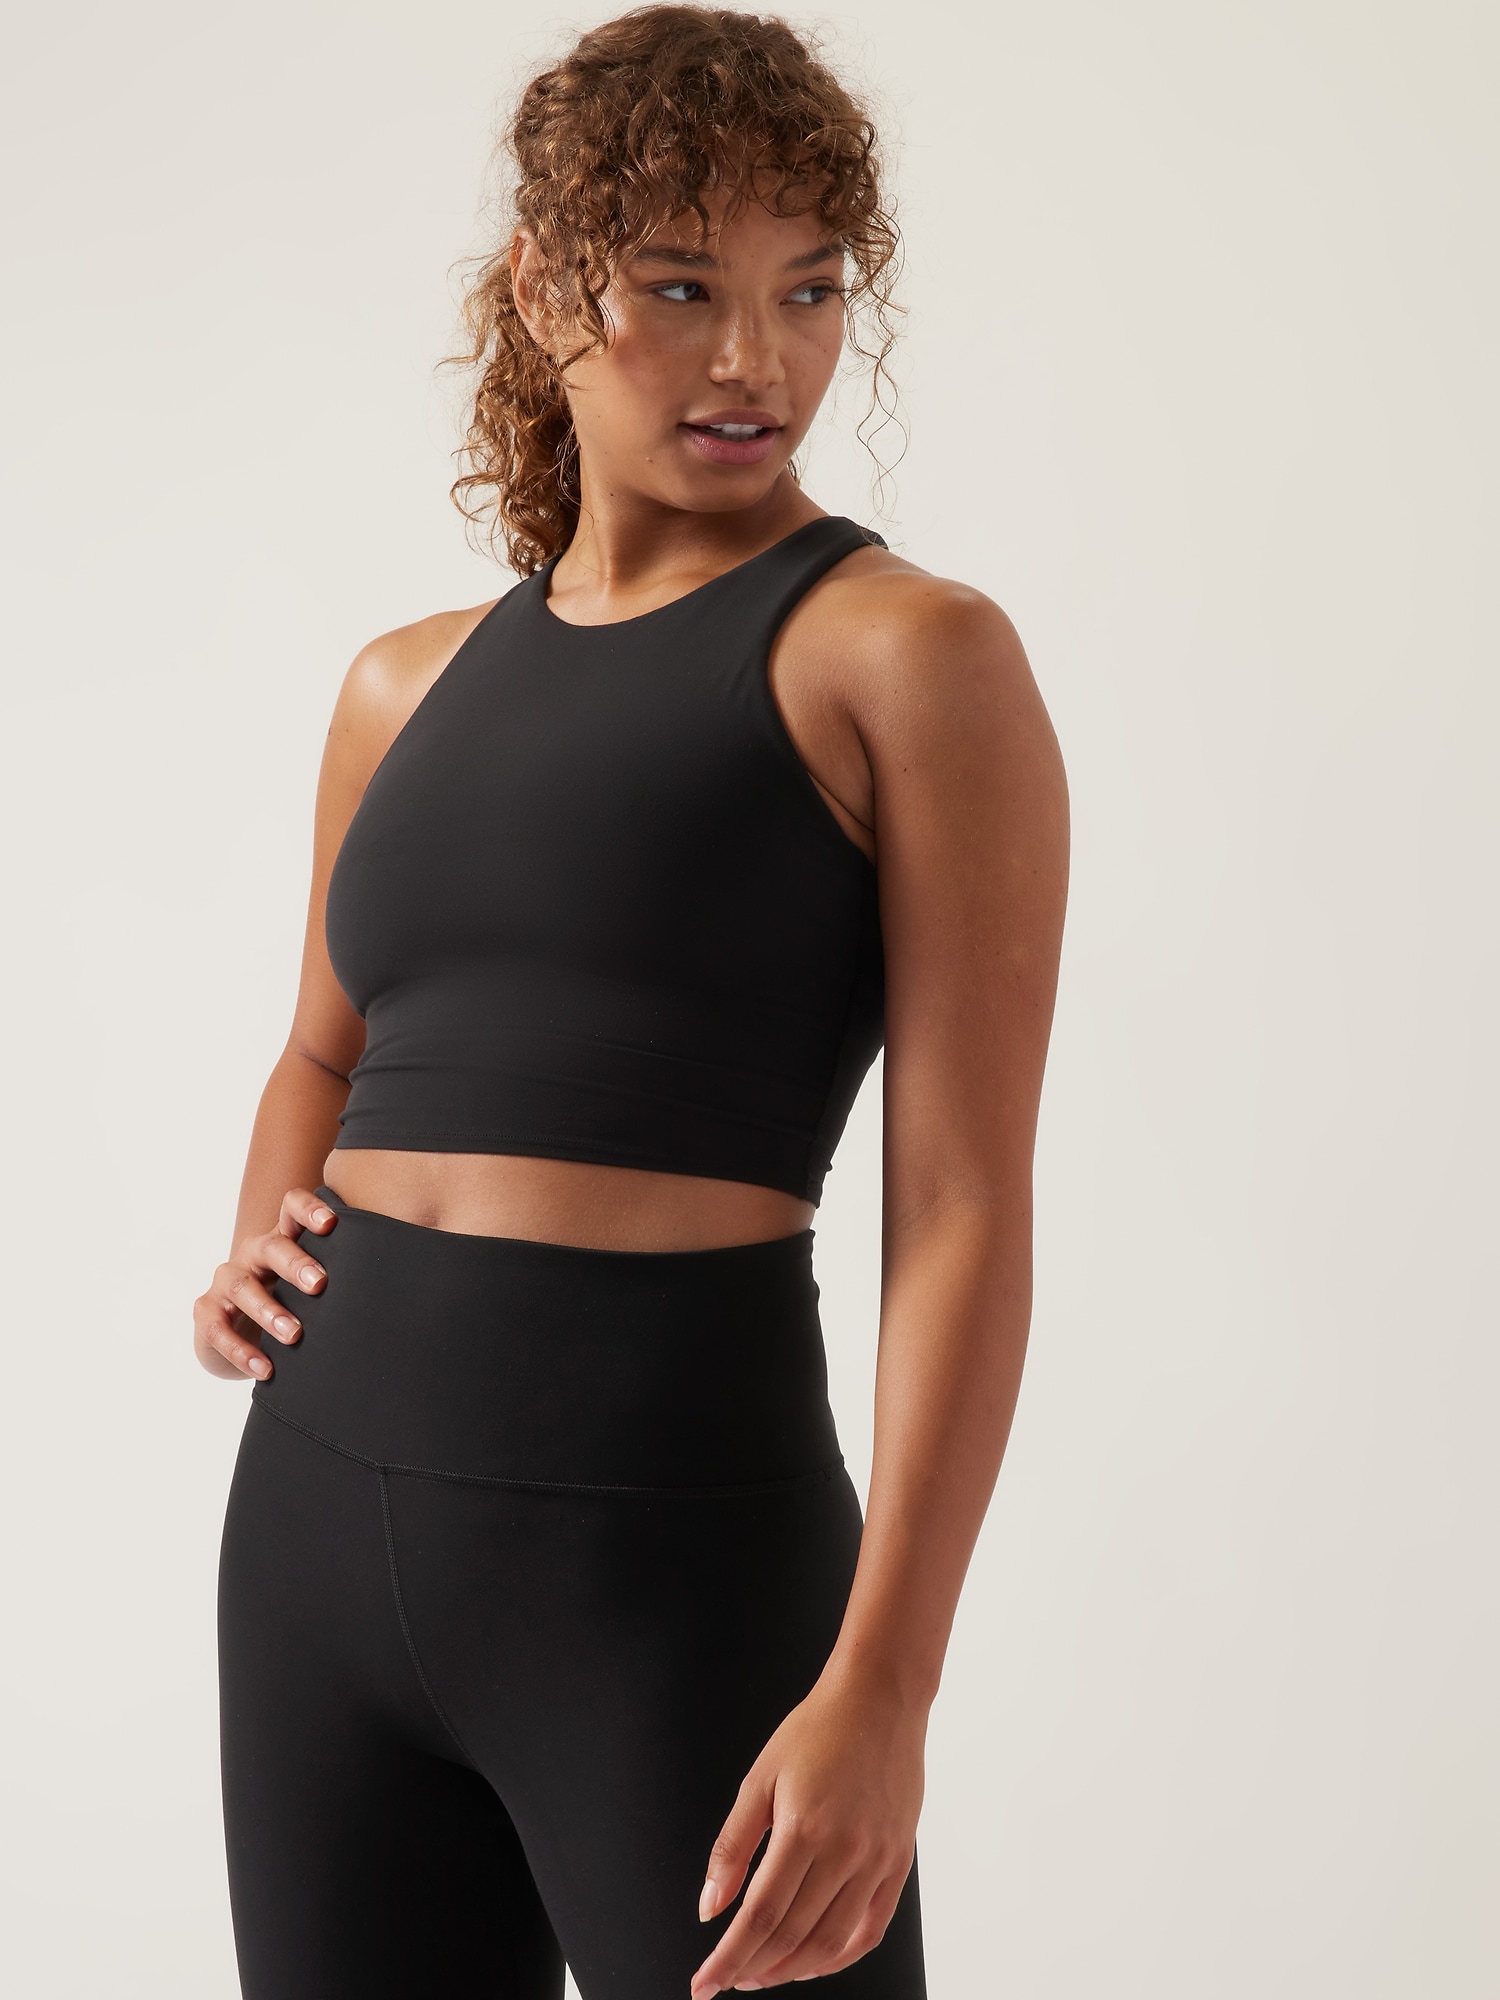 Lululemon Sports Bra  No Matter How You Spin It — You Need These